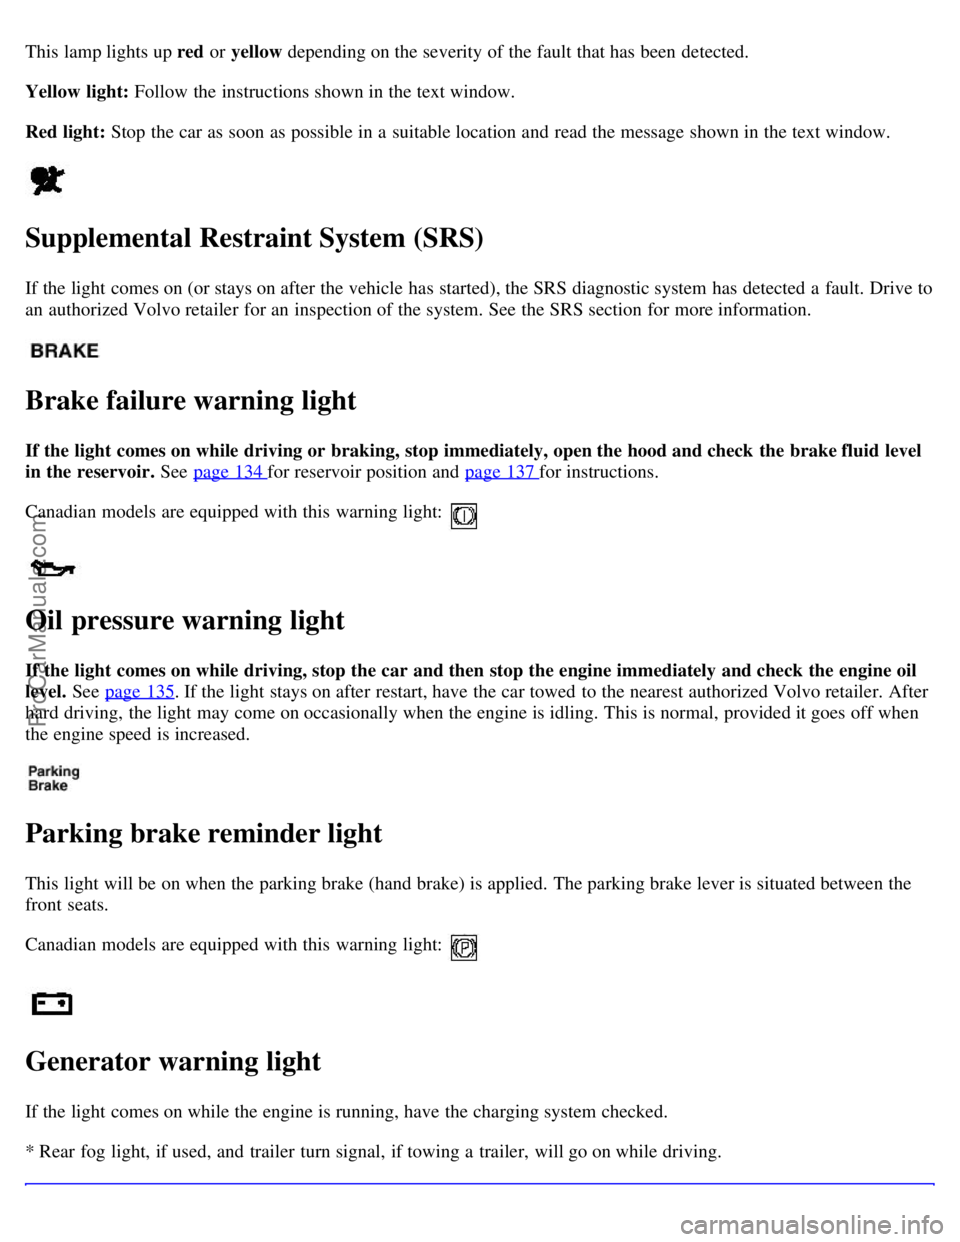 VOLVO V70 2003  Owners Manual This lamp lights up red or yellow depending on the severity of the fault that has been detected.
Yellow  light: Follow the instructions shown in the text window.
Red light:  Stop the car as soon as po